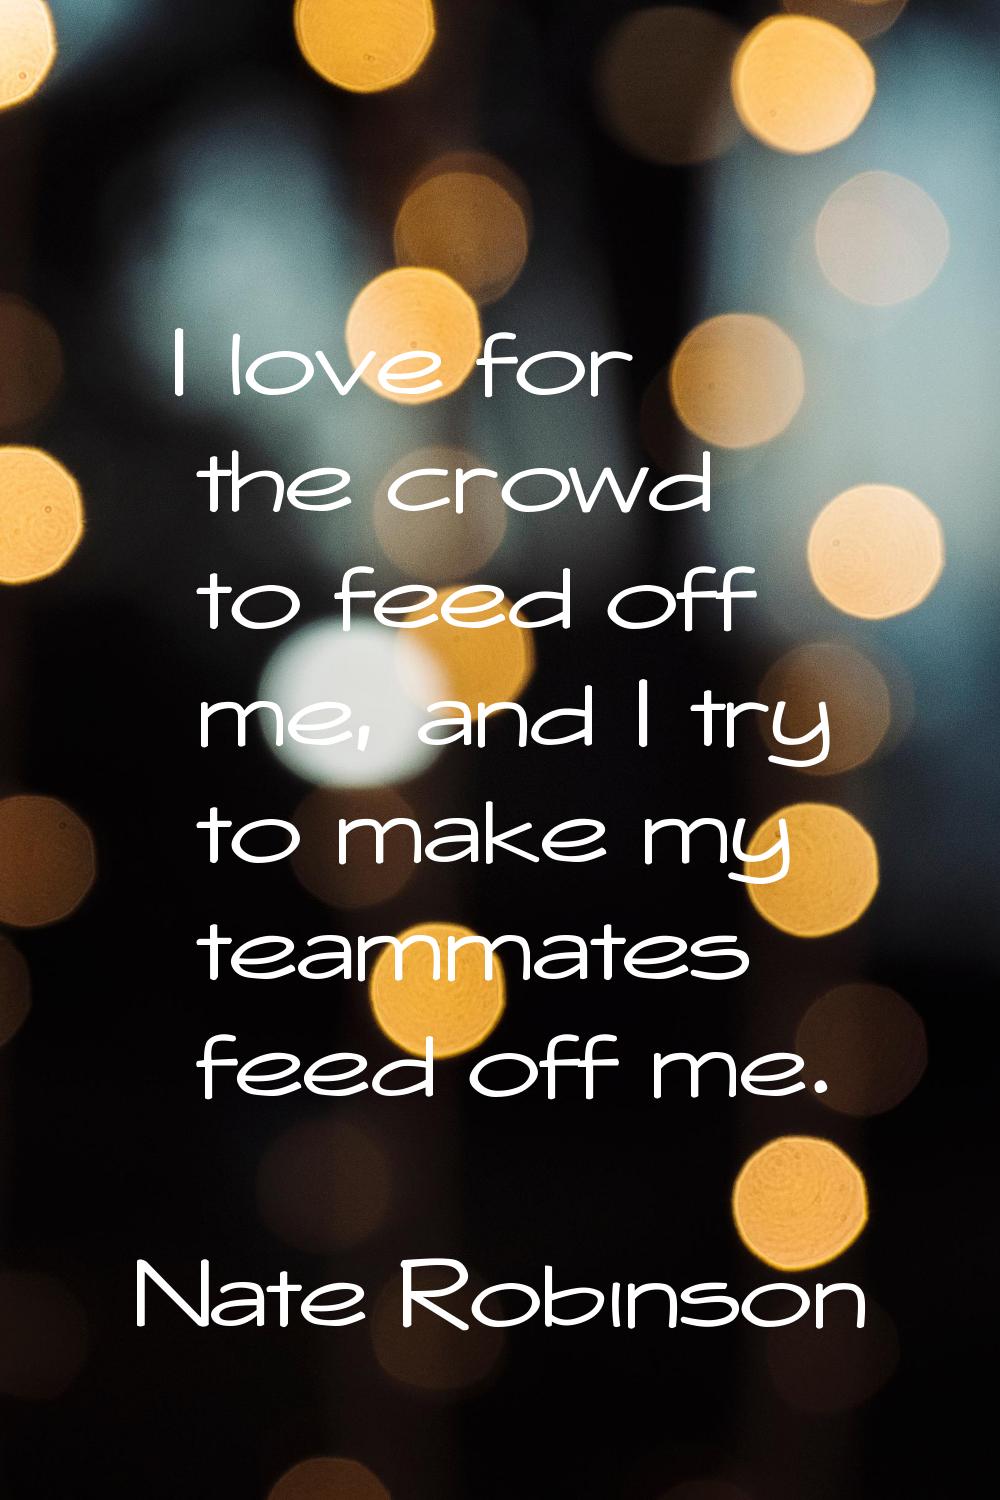 I love for the crowd to feed off me, and I try to make my teammates feed off me.